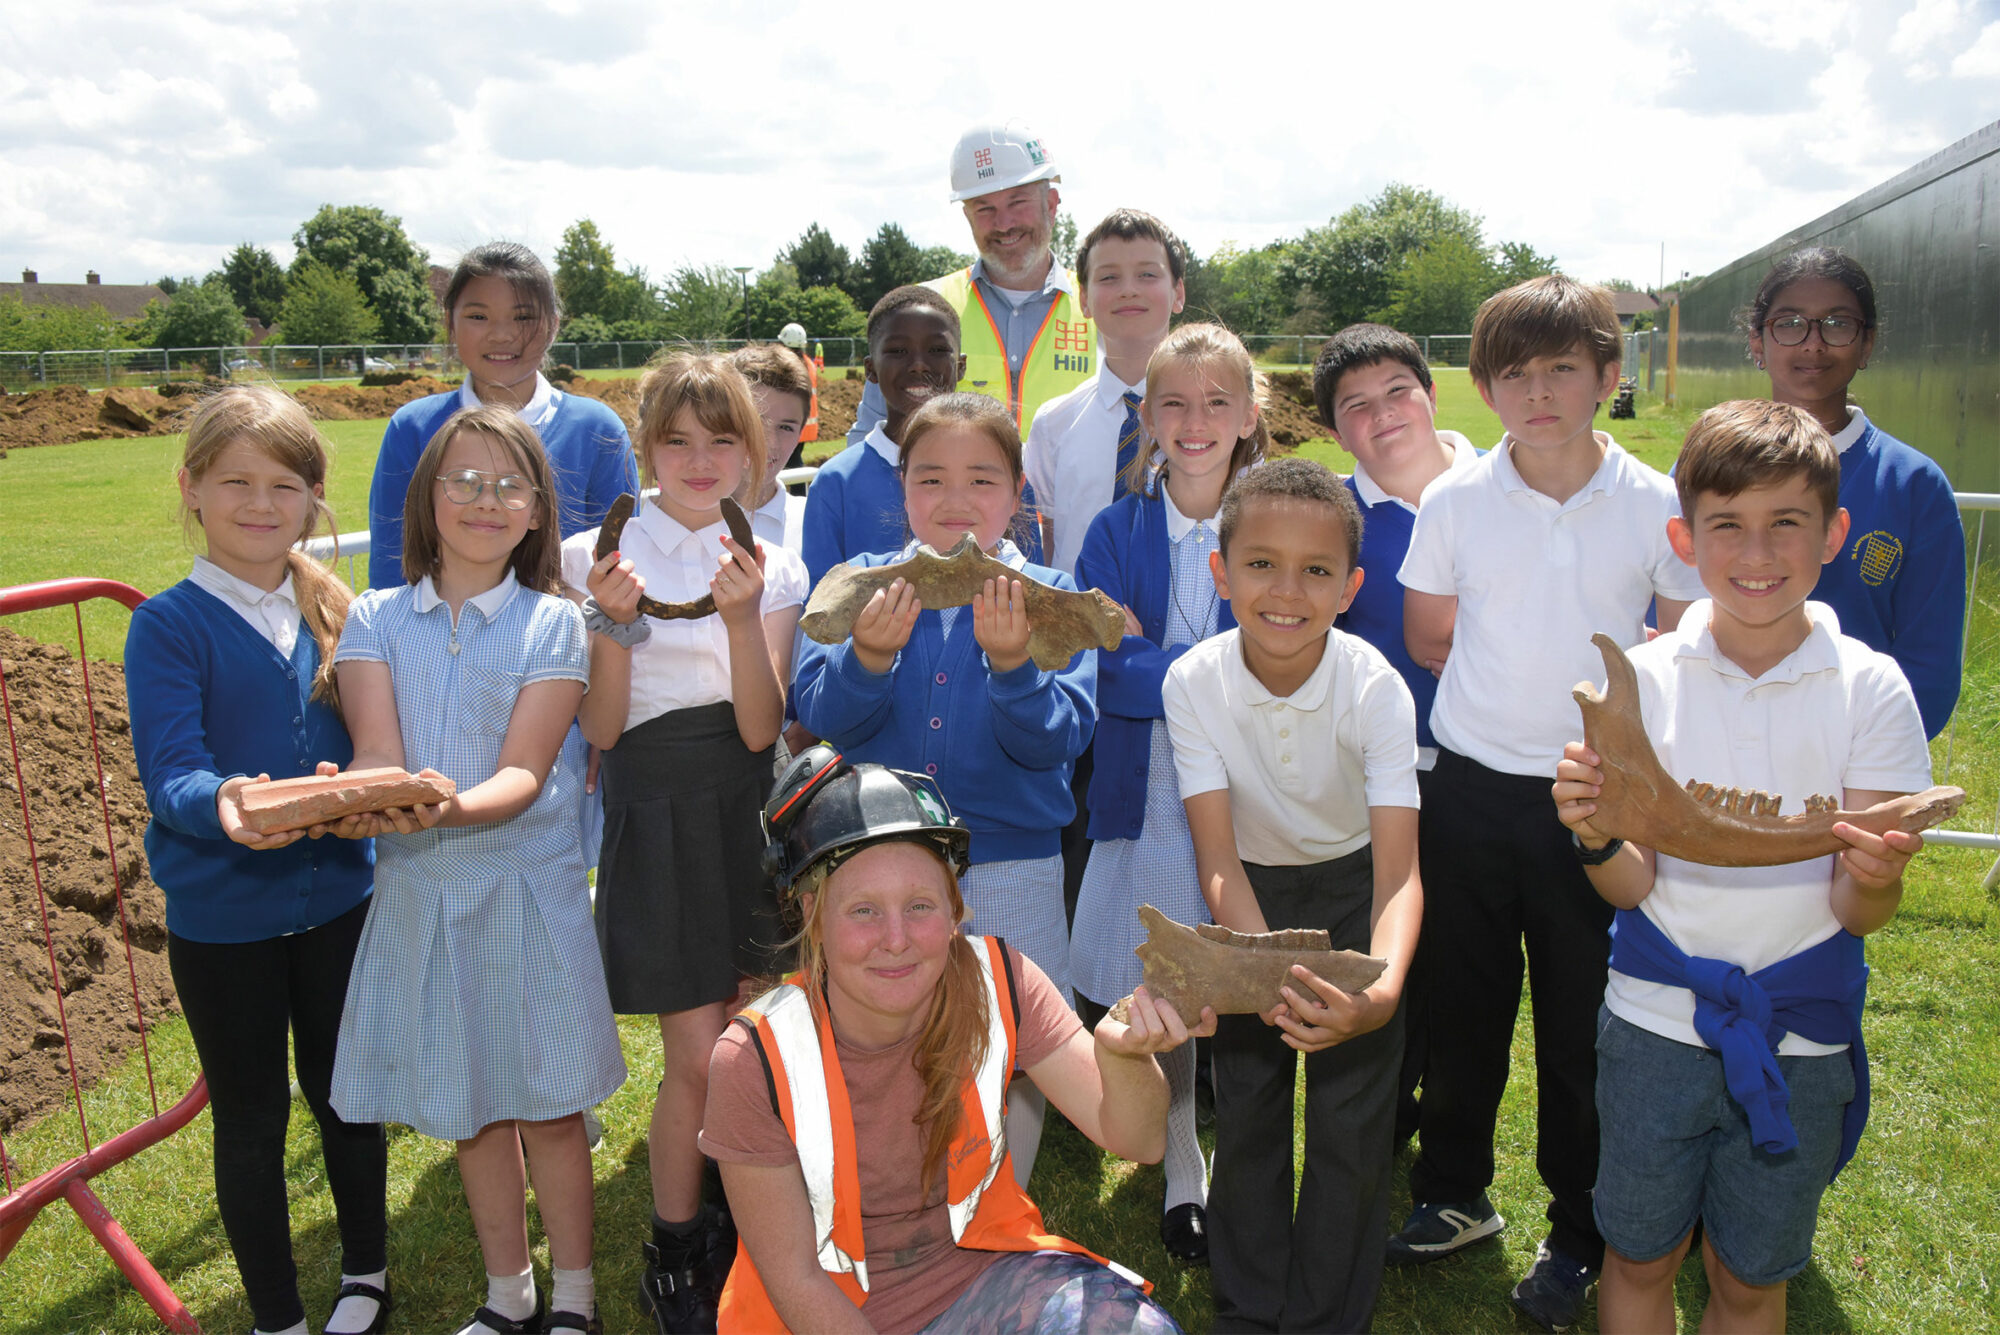 Archaeology visit: Orchard Park Primary and St Laurence Catholic School students came to observe the archaeology being carried out on the football pitch.